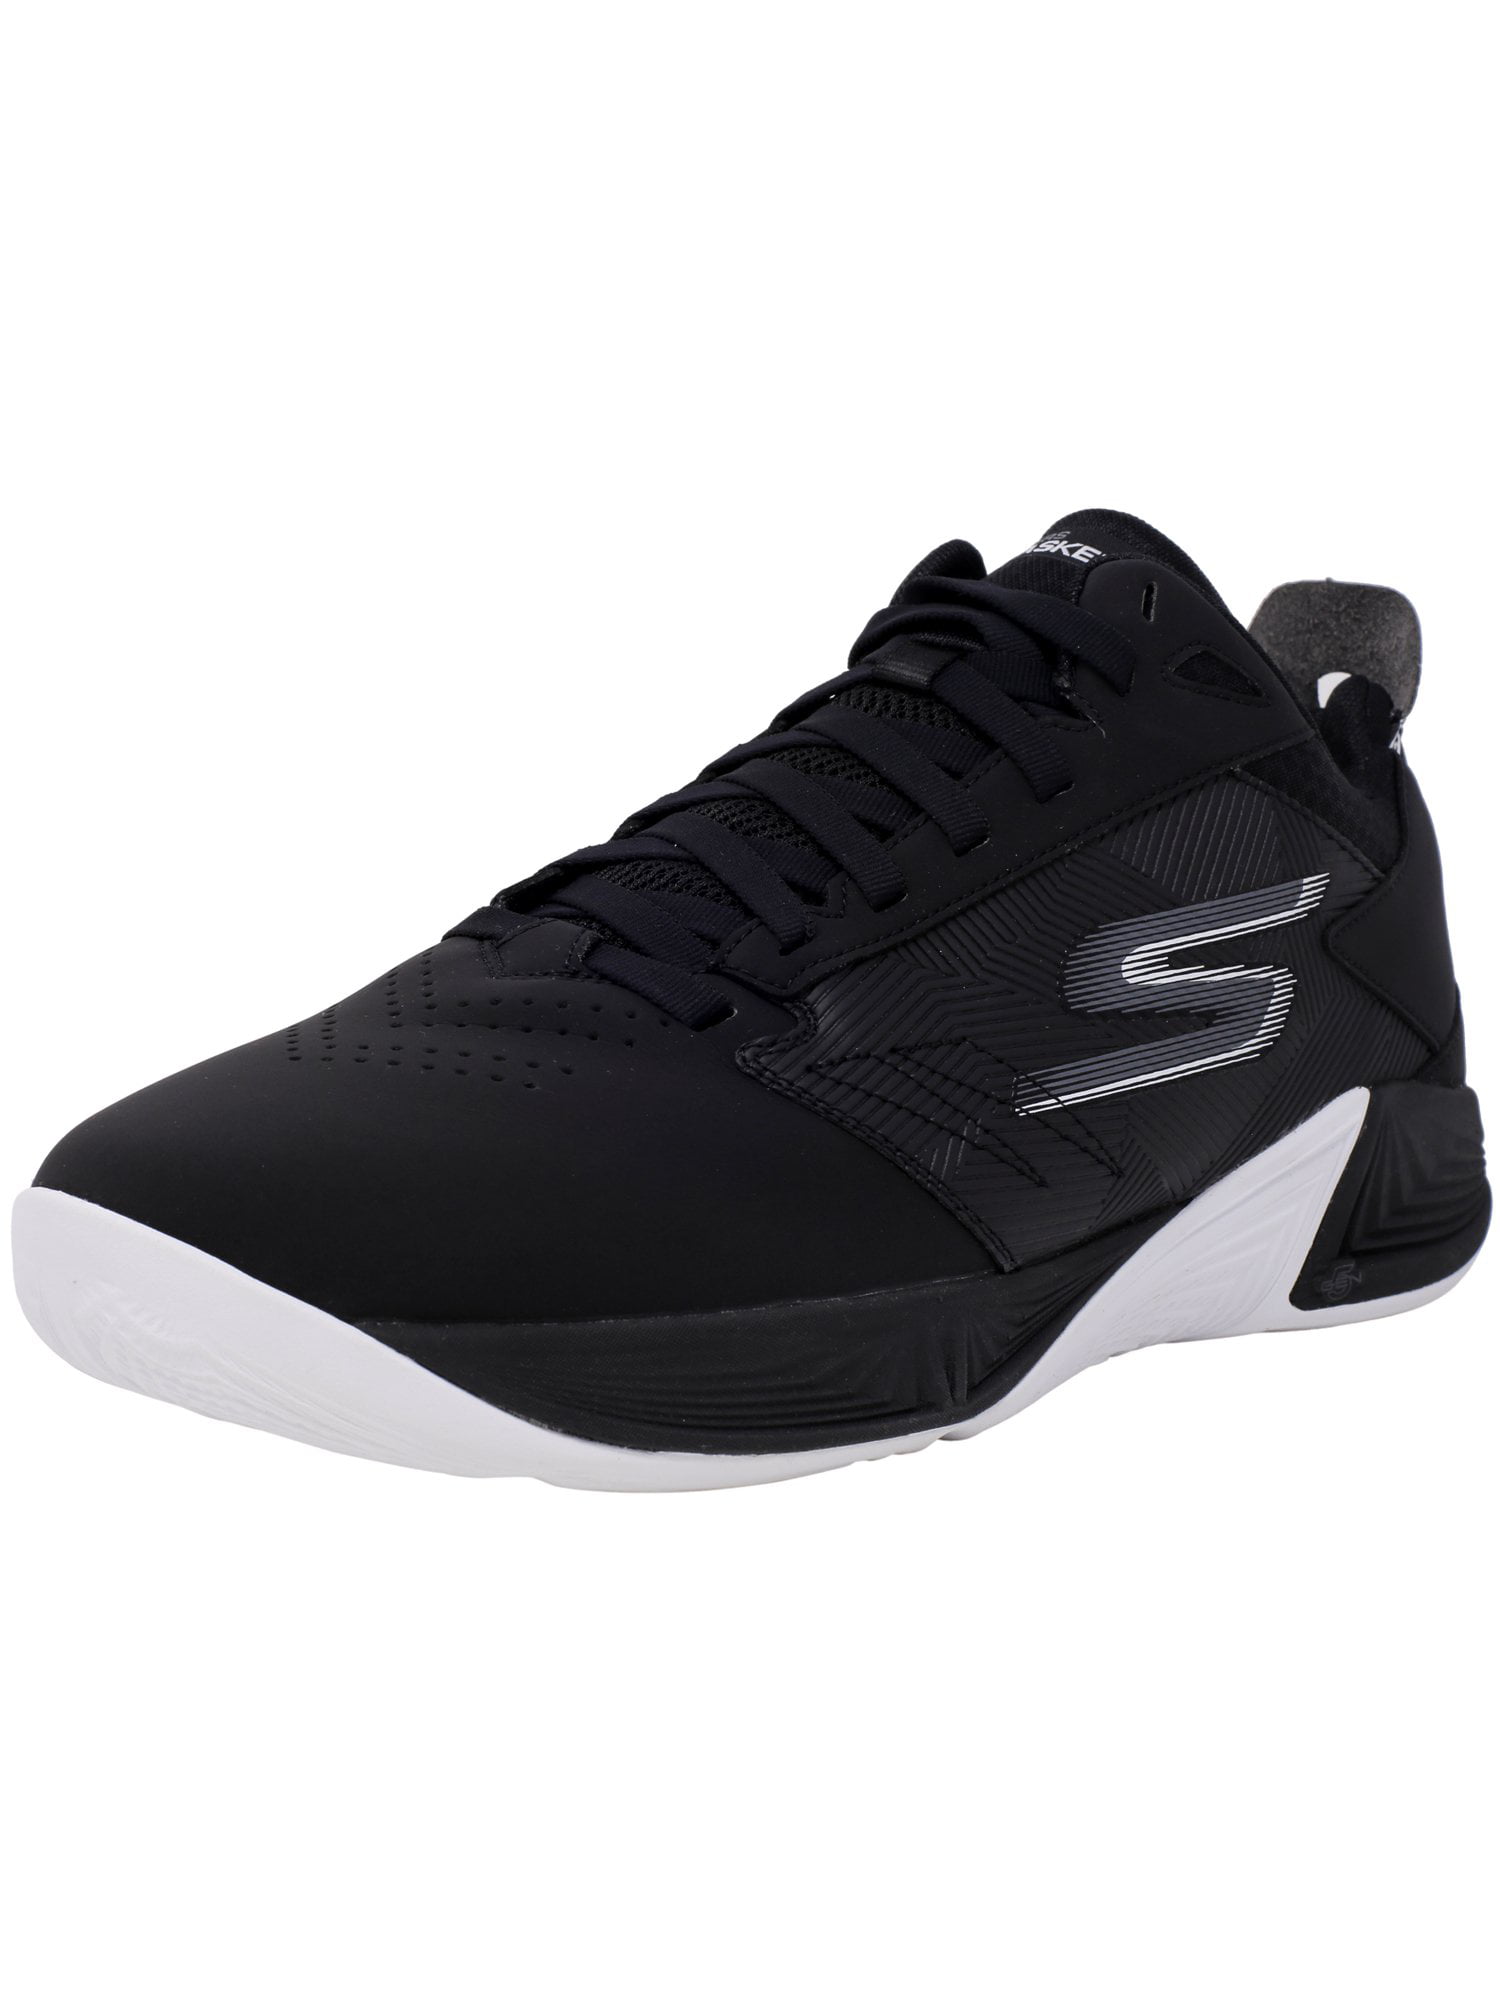 White Ankle-High Basketball Shoe 